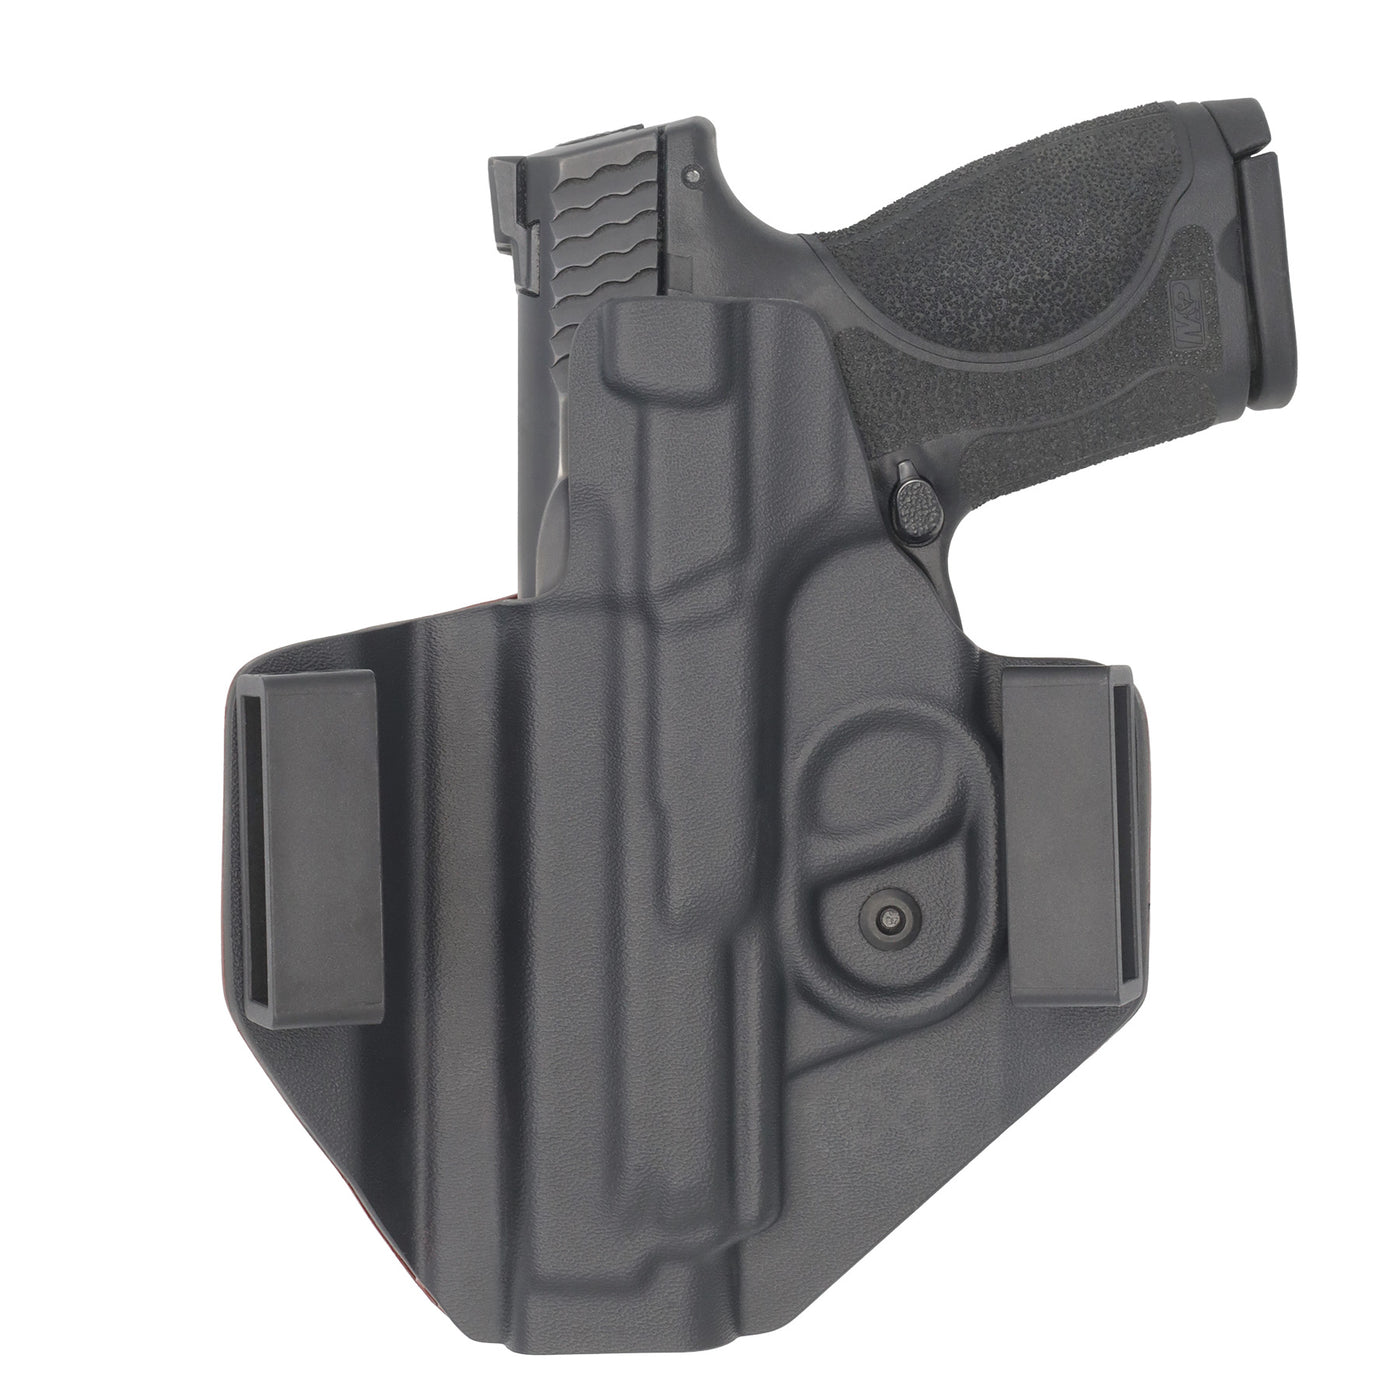 C&G Holsters custom Signature Series outside the waistband in holstered position back view